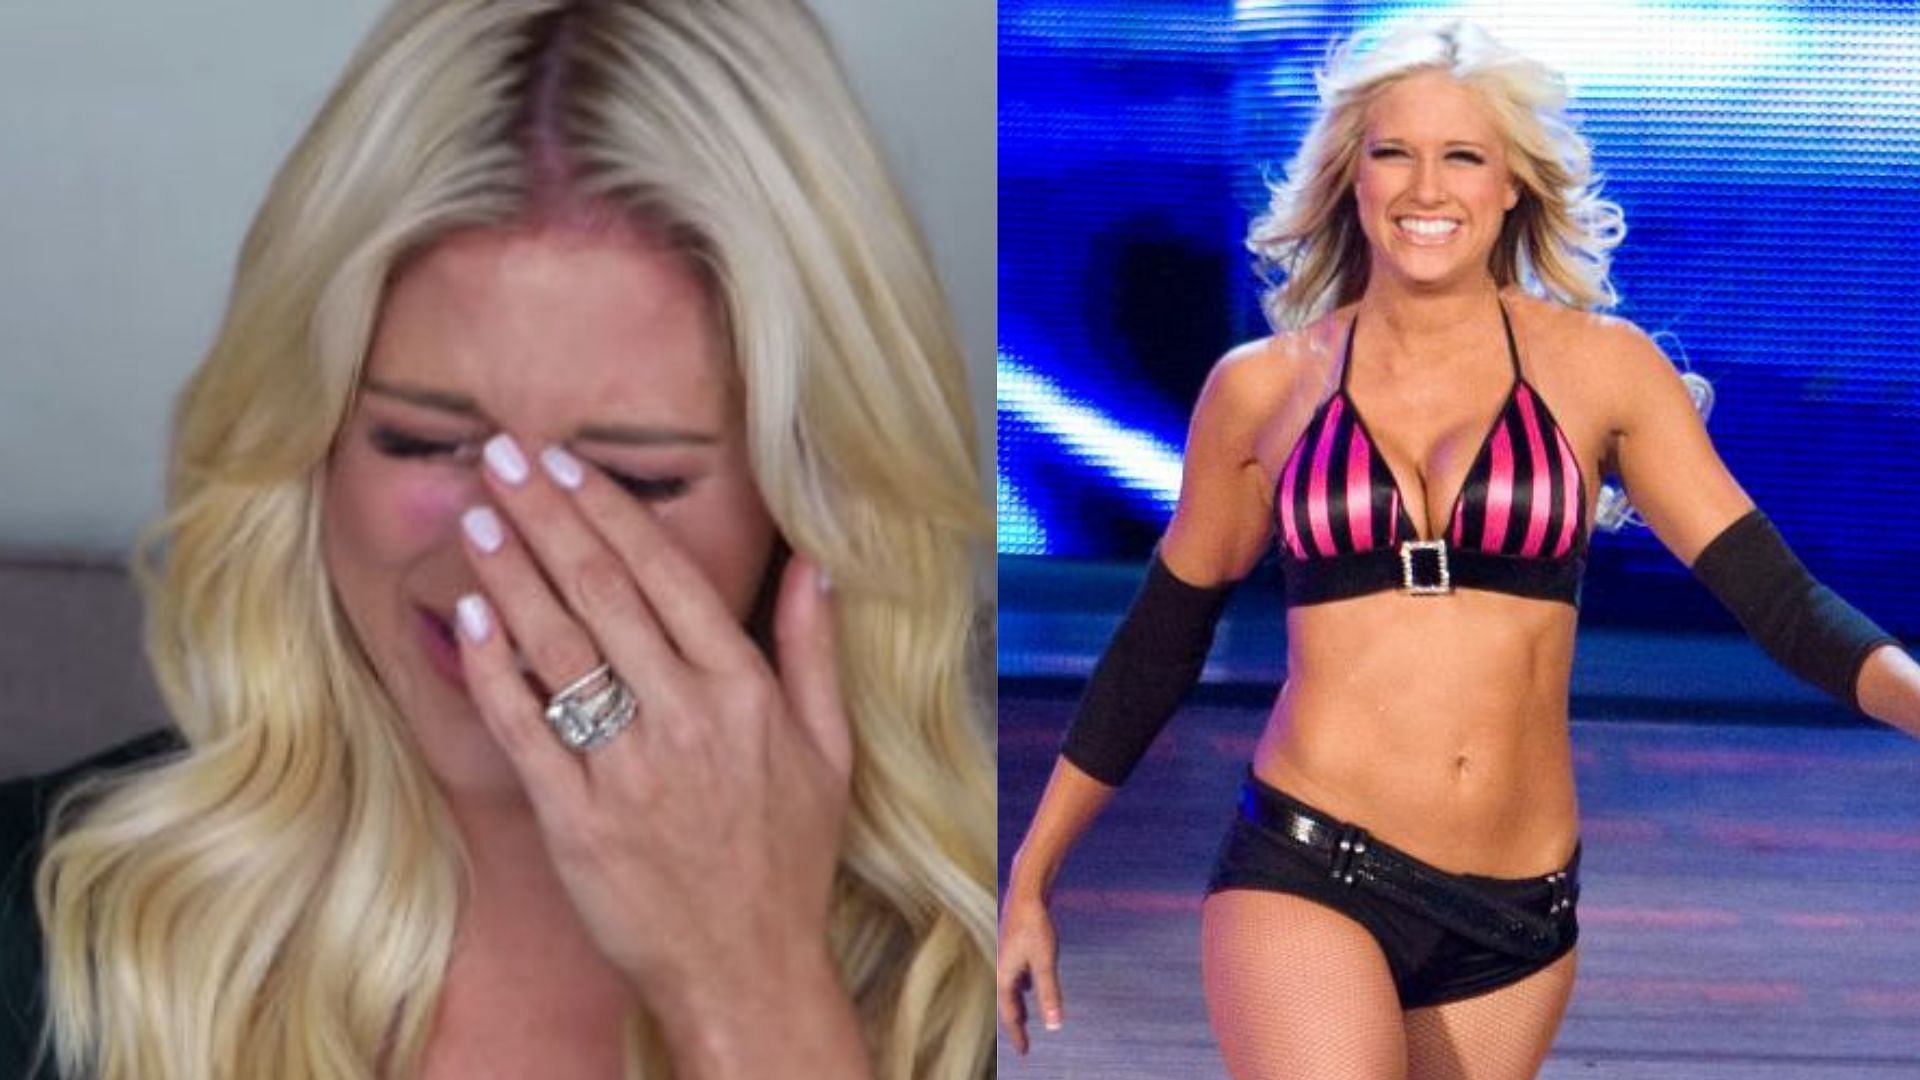 adam neiderhiser recommends wwe kelly kelly pic pic